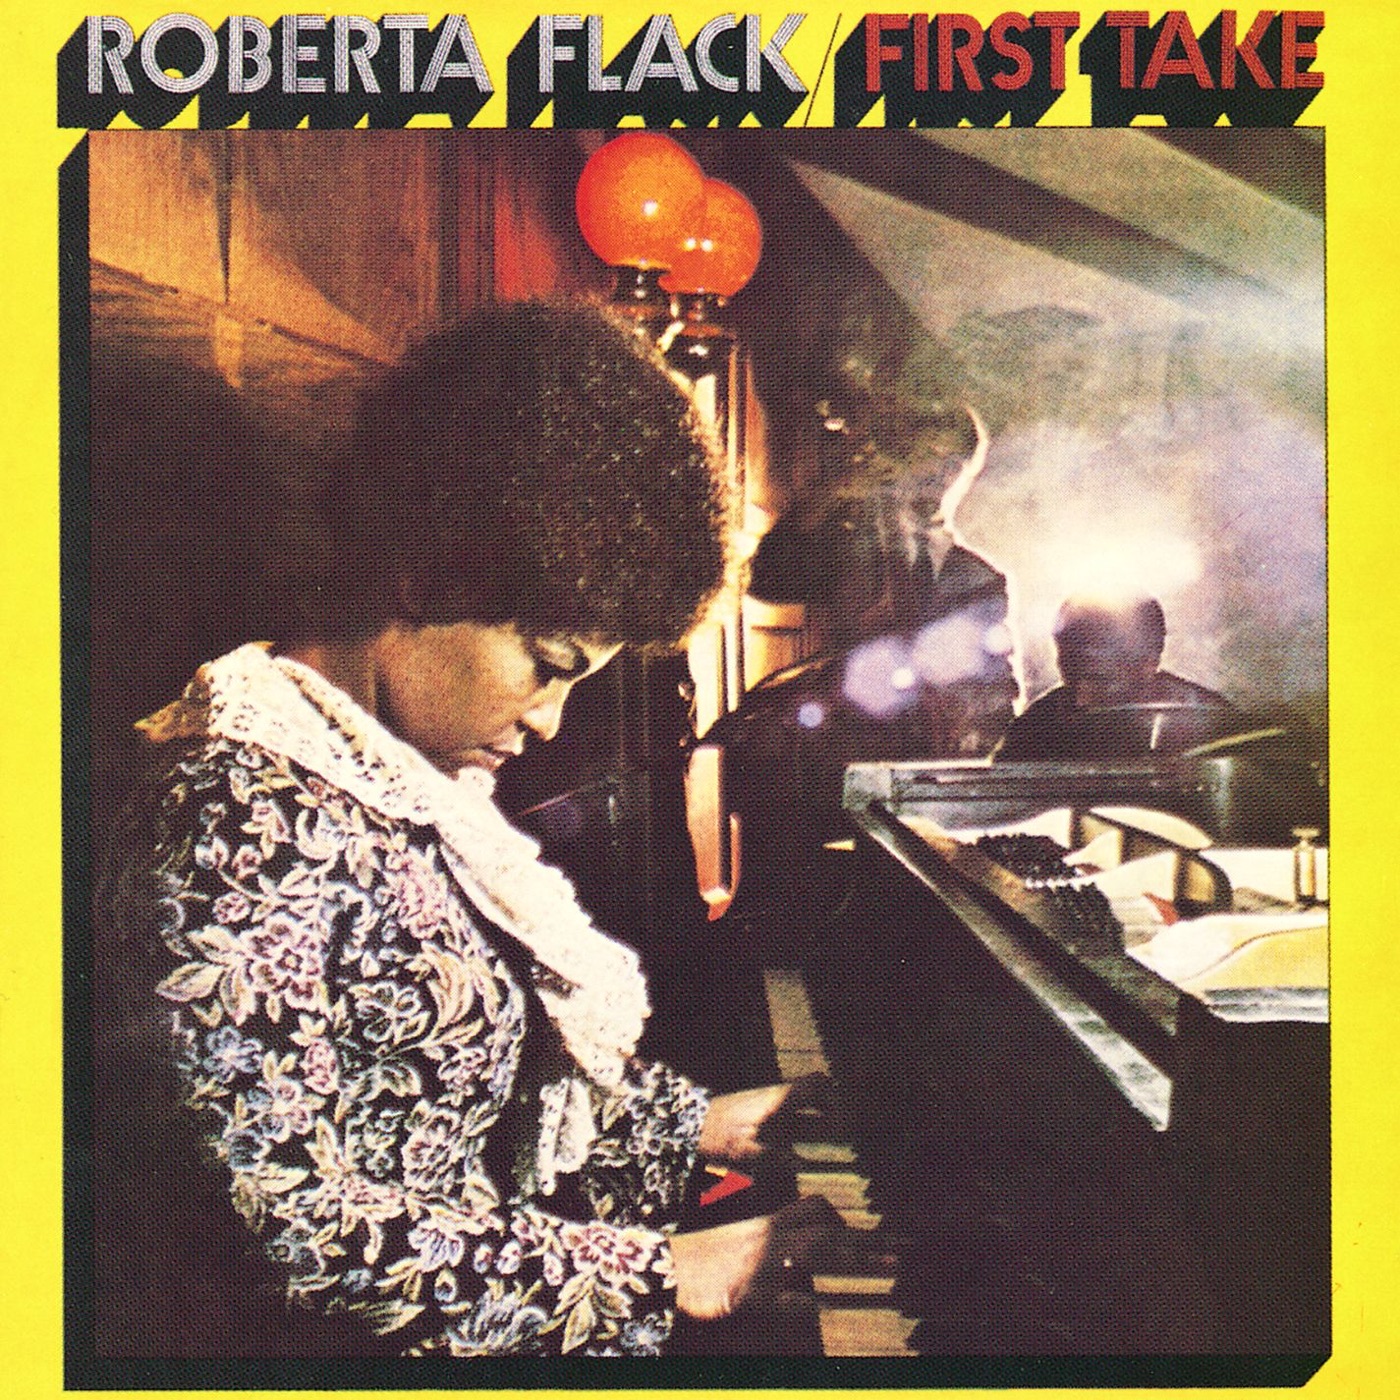 First Take by Roberta Flack